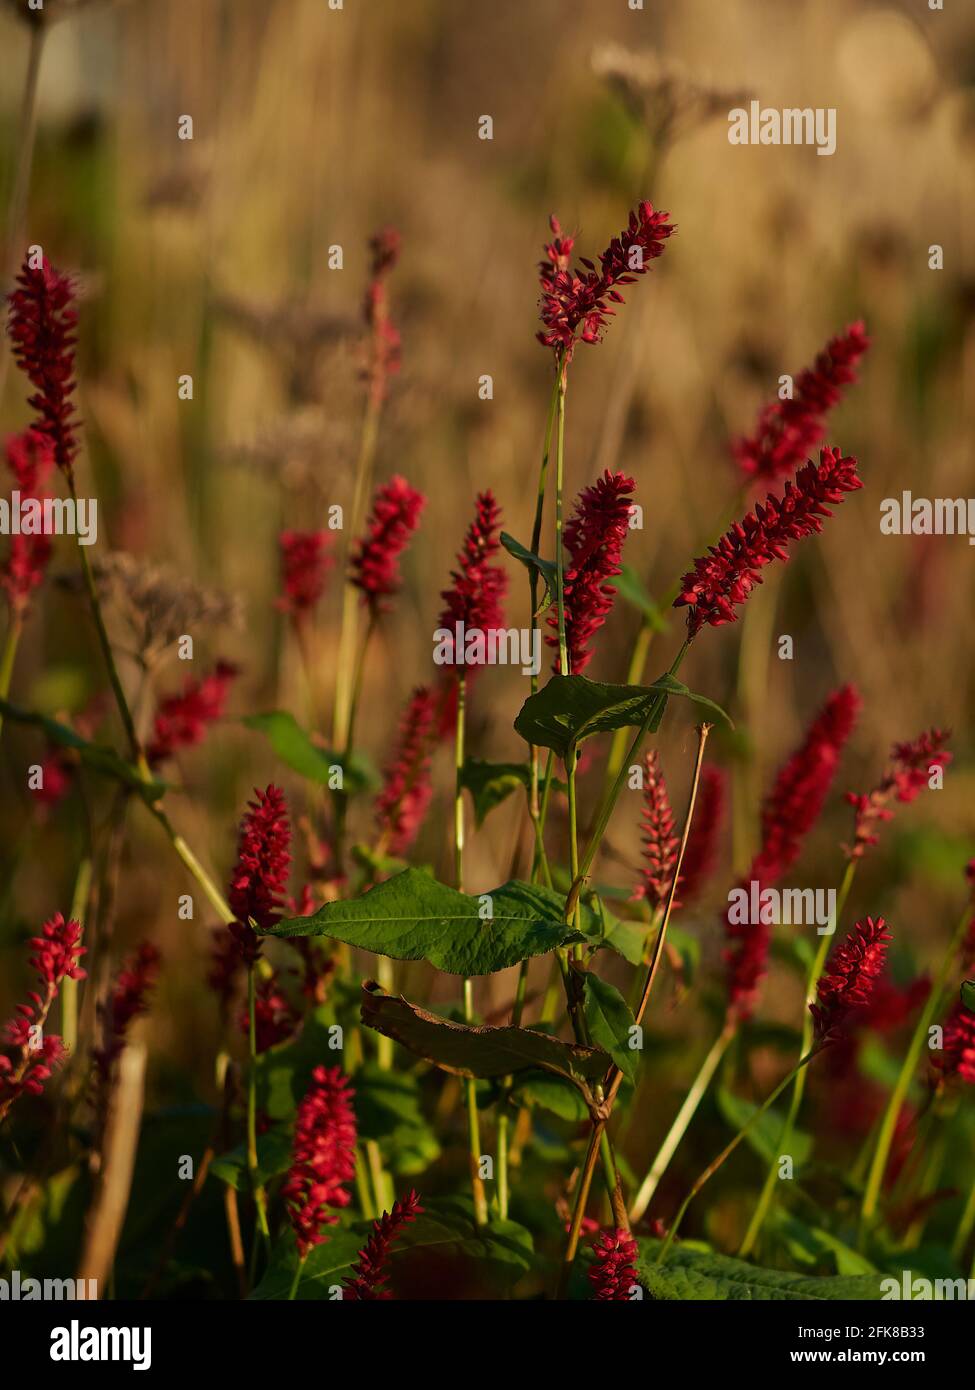 An autumnal close-up of small clumps of red flowers on tall stems in shallow focus and in warm, soft, golden light and with a background of grasses. Stock Photo